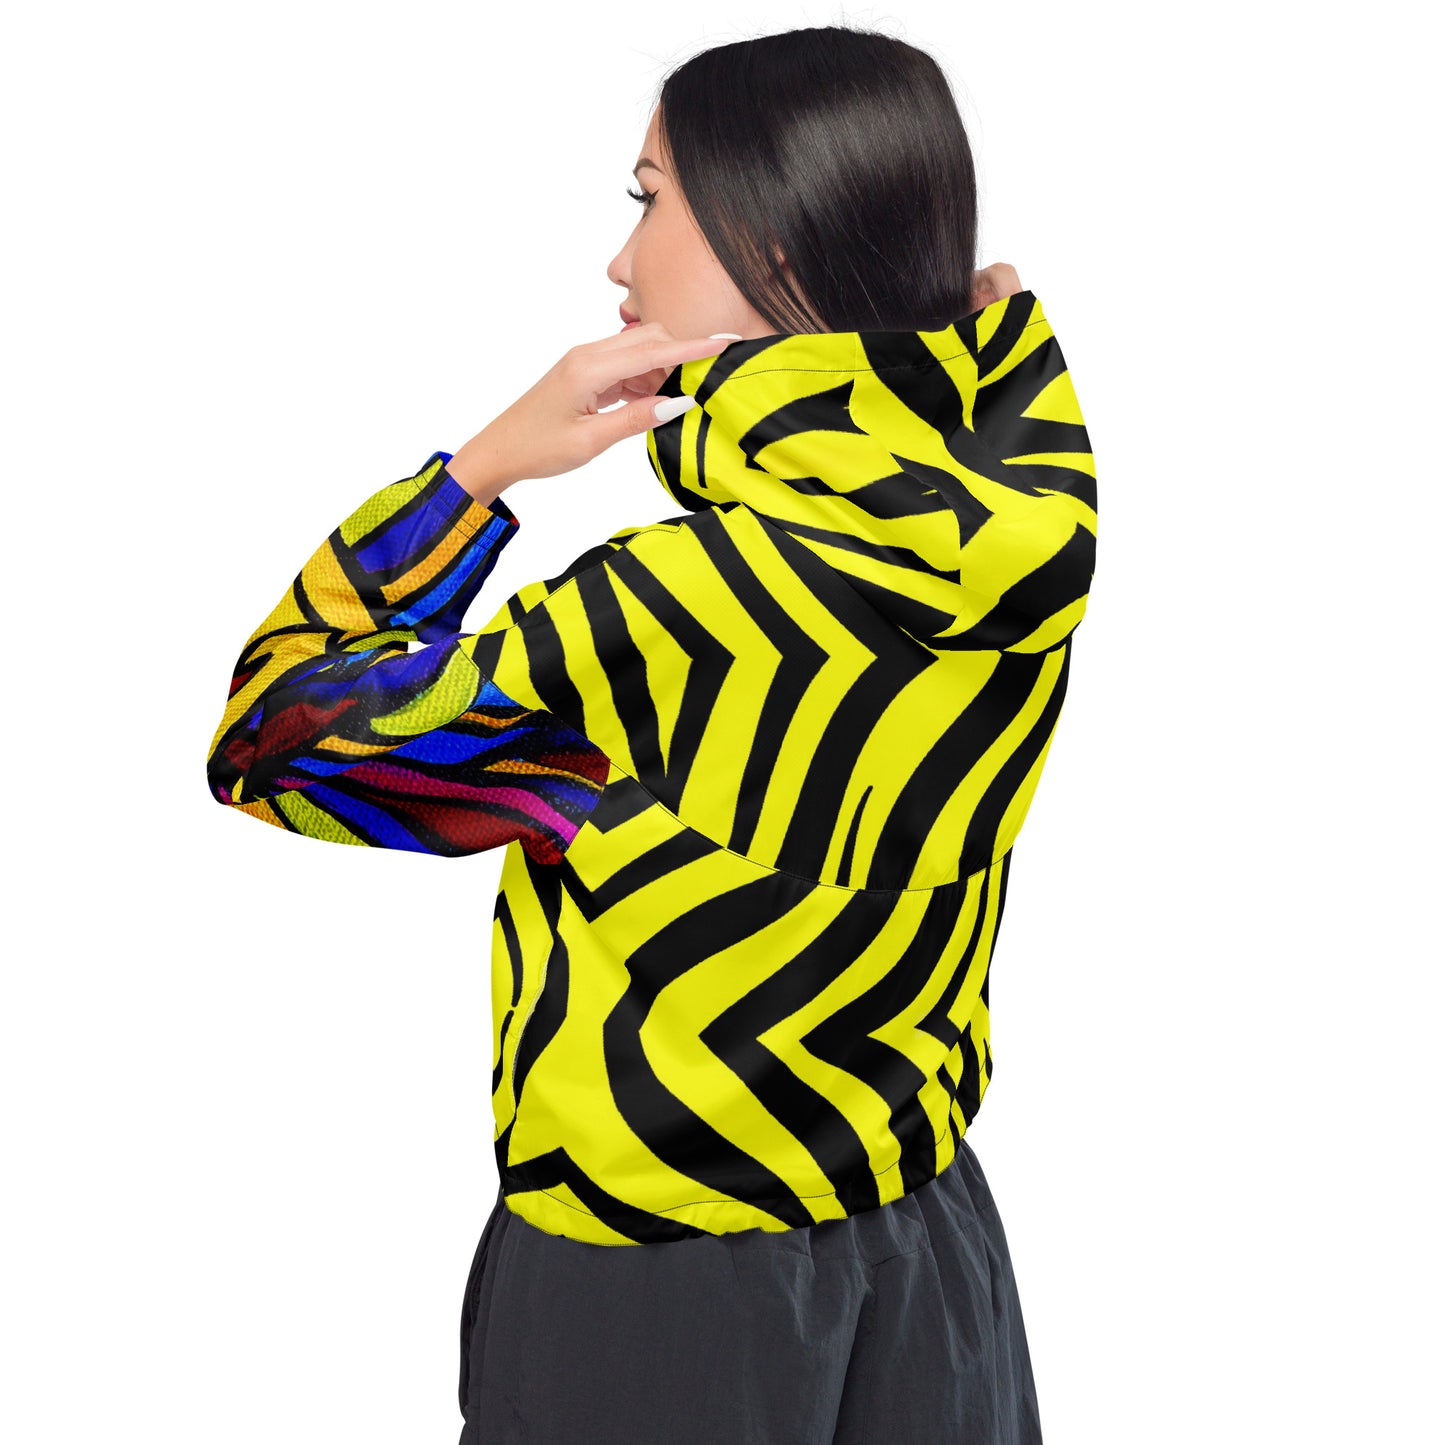 Women’s cropped windbreaker - Black and Yellow with Goochie Poochie Sleeves - DMD Bags